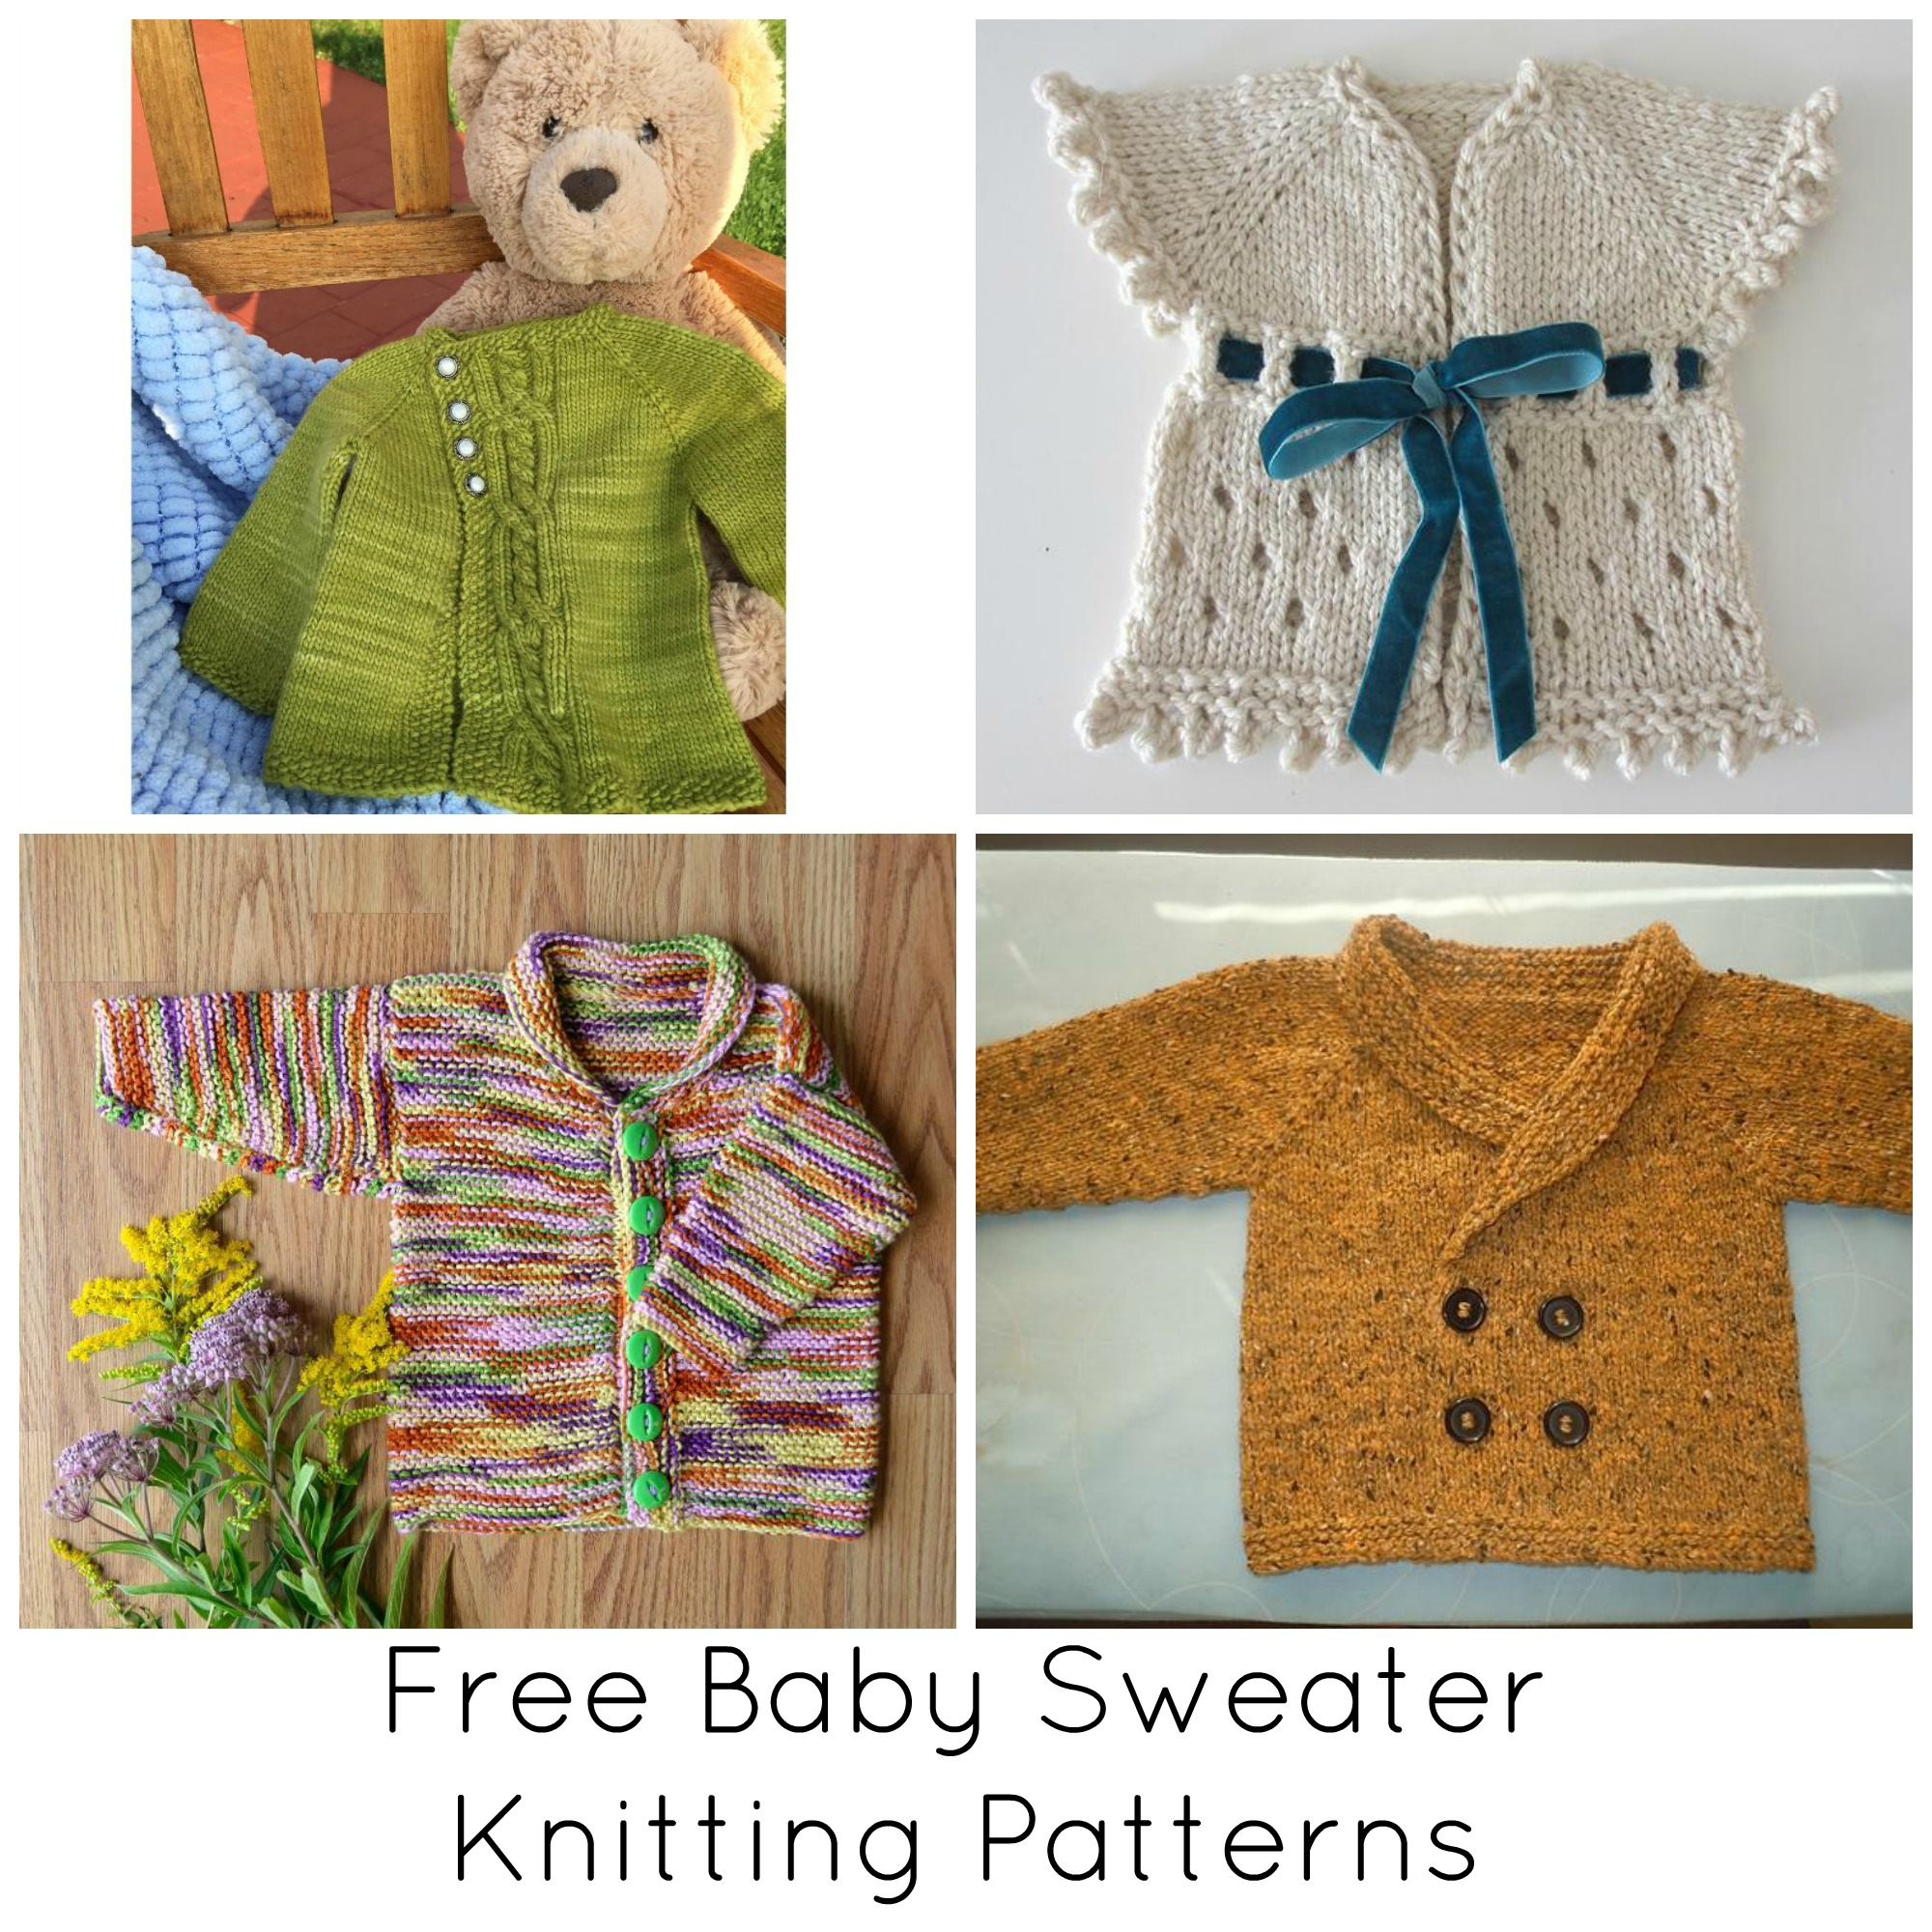 Knitting Pattern Baby Sweater Our Favorite Free Ba Sweater Knitting Patterns